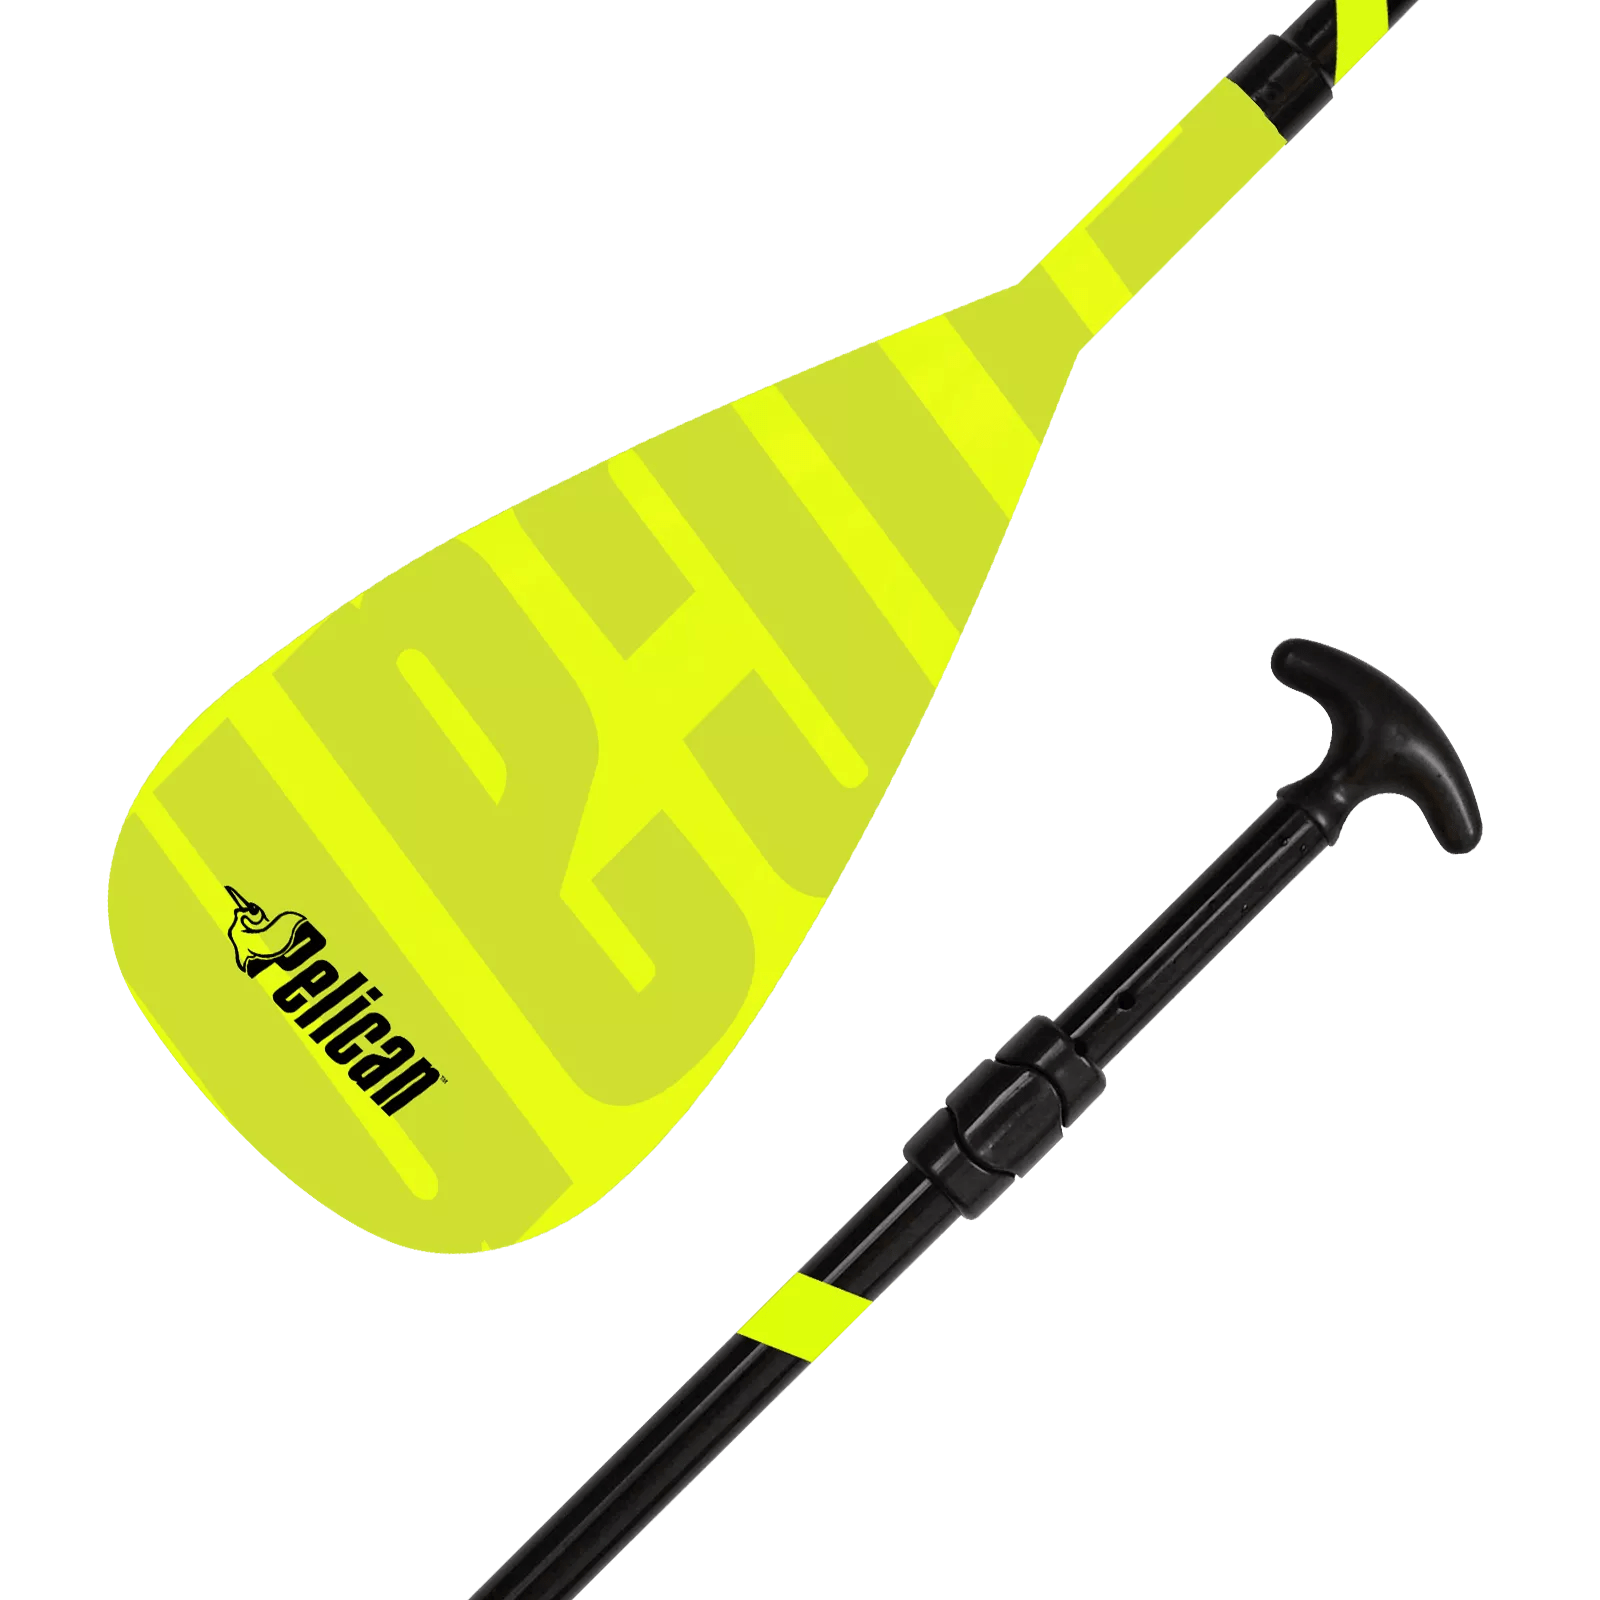 PELICAN - Vate SUP Paddle 180-220 cm (70"-87") - Black - PS1145-00 - ISO 